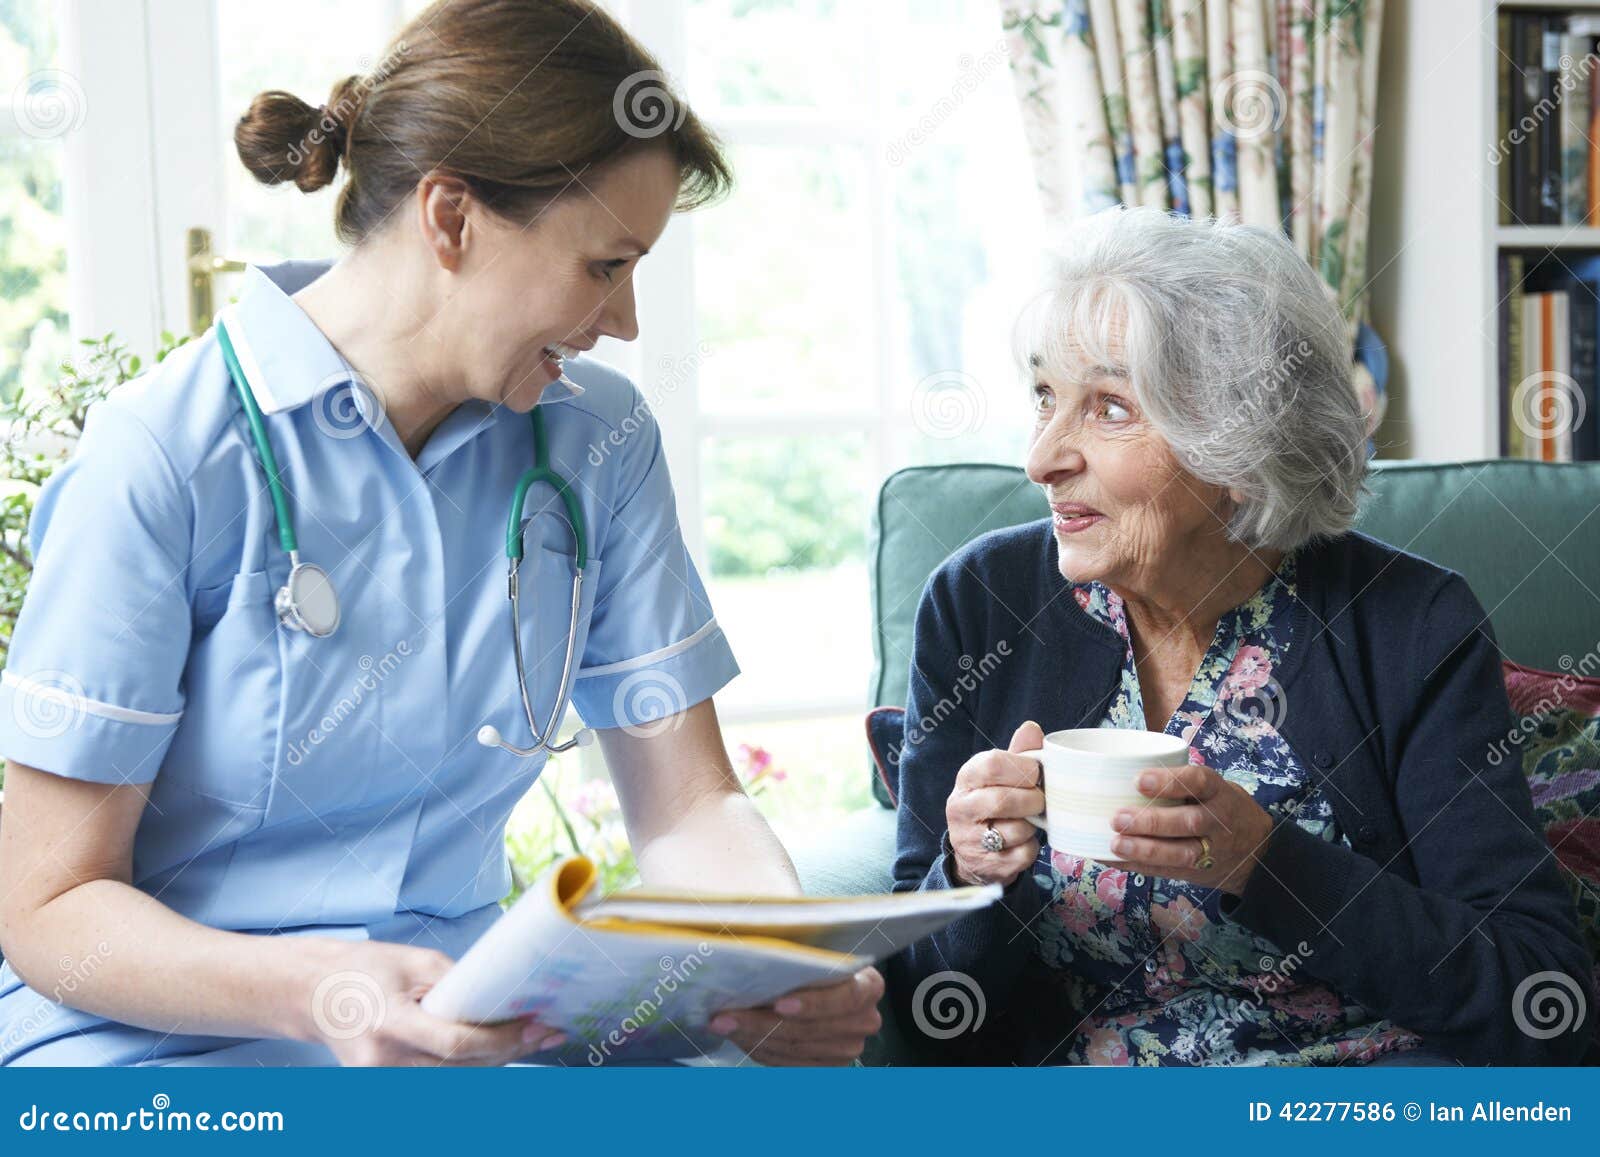 nurse discussing medical notes with senior woman at home